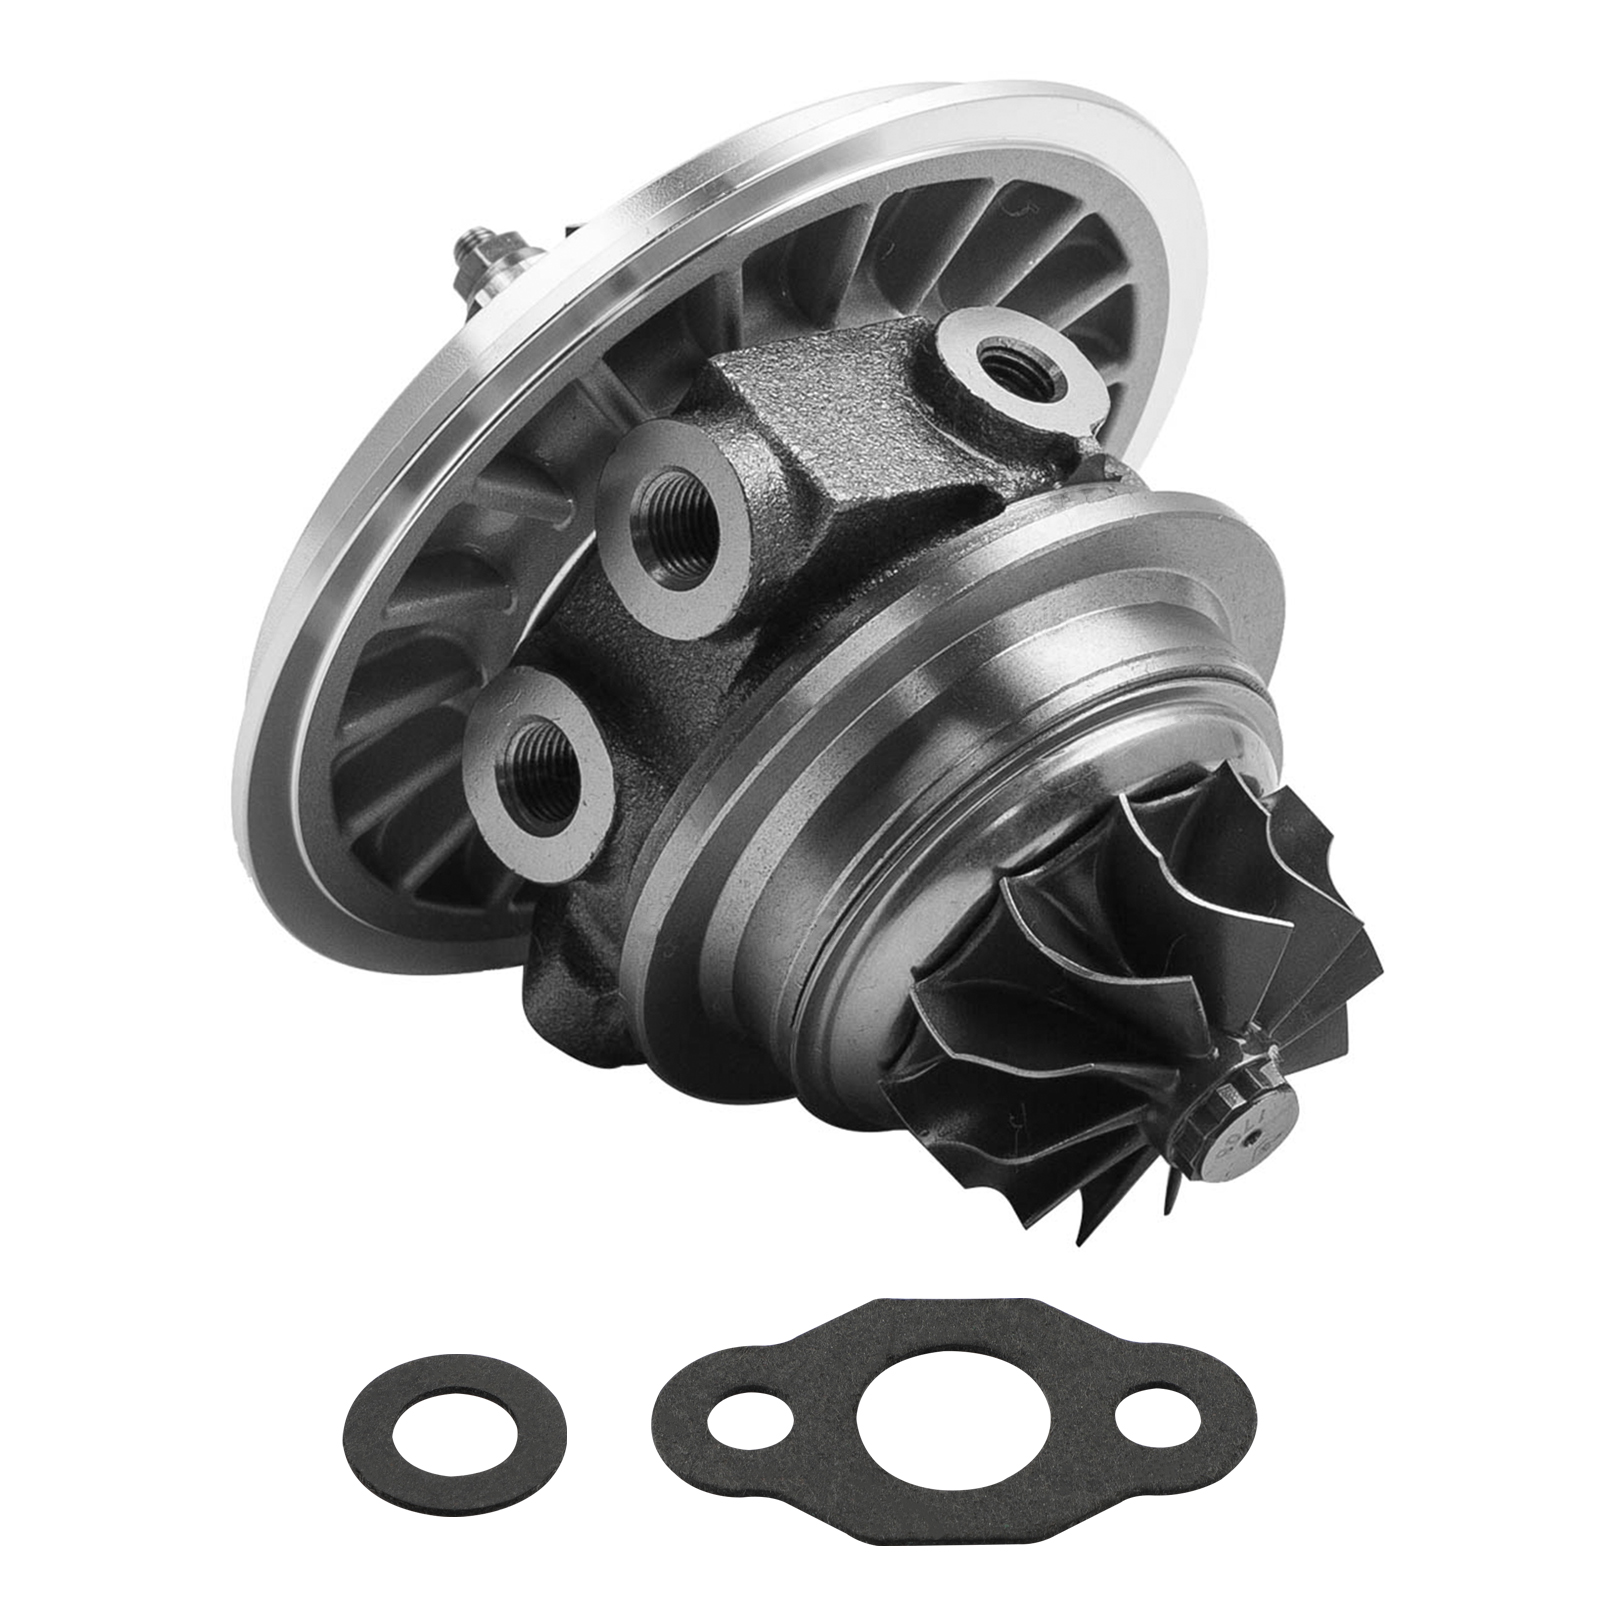 compatible for isuzu and compatible for gmc w 5.2l 4hk1 29006n6520 turbo turbocharger catridge core